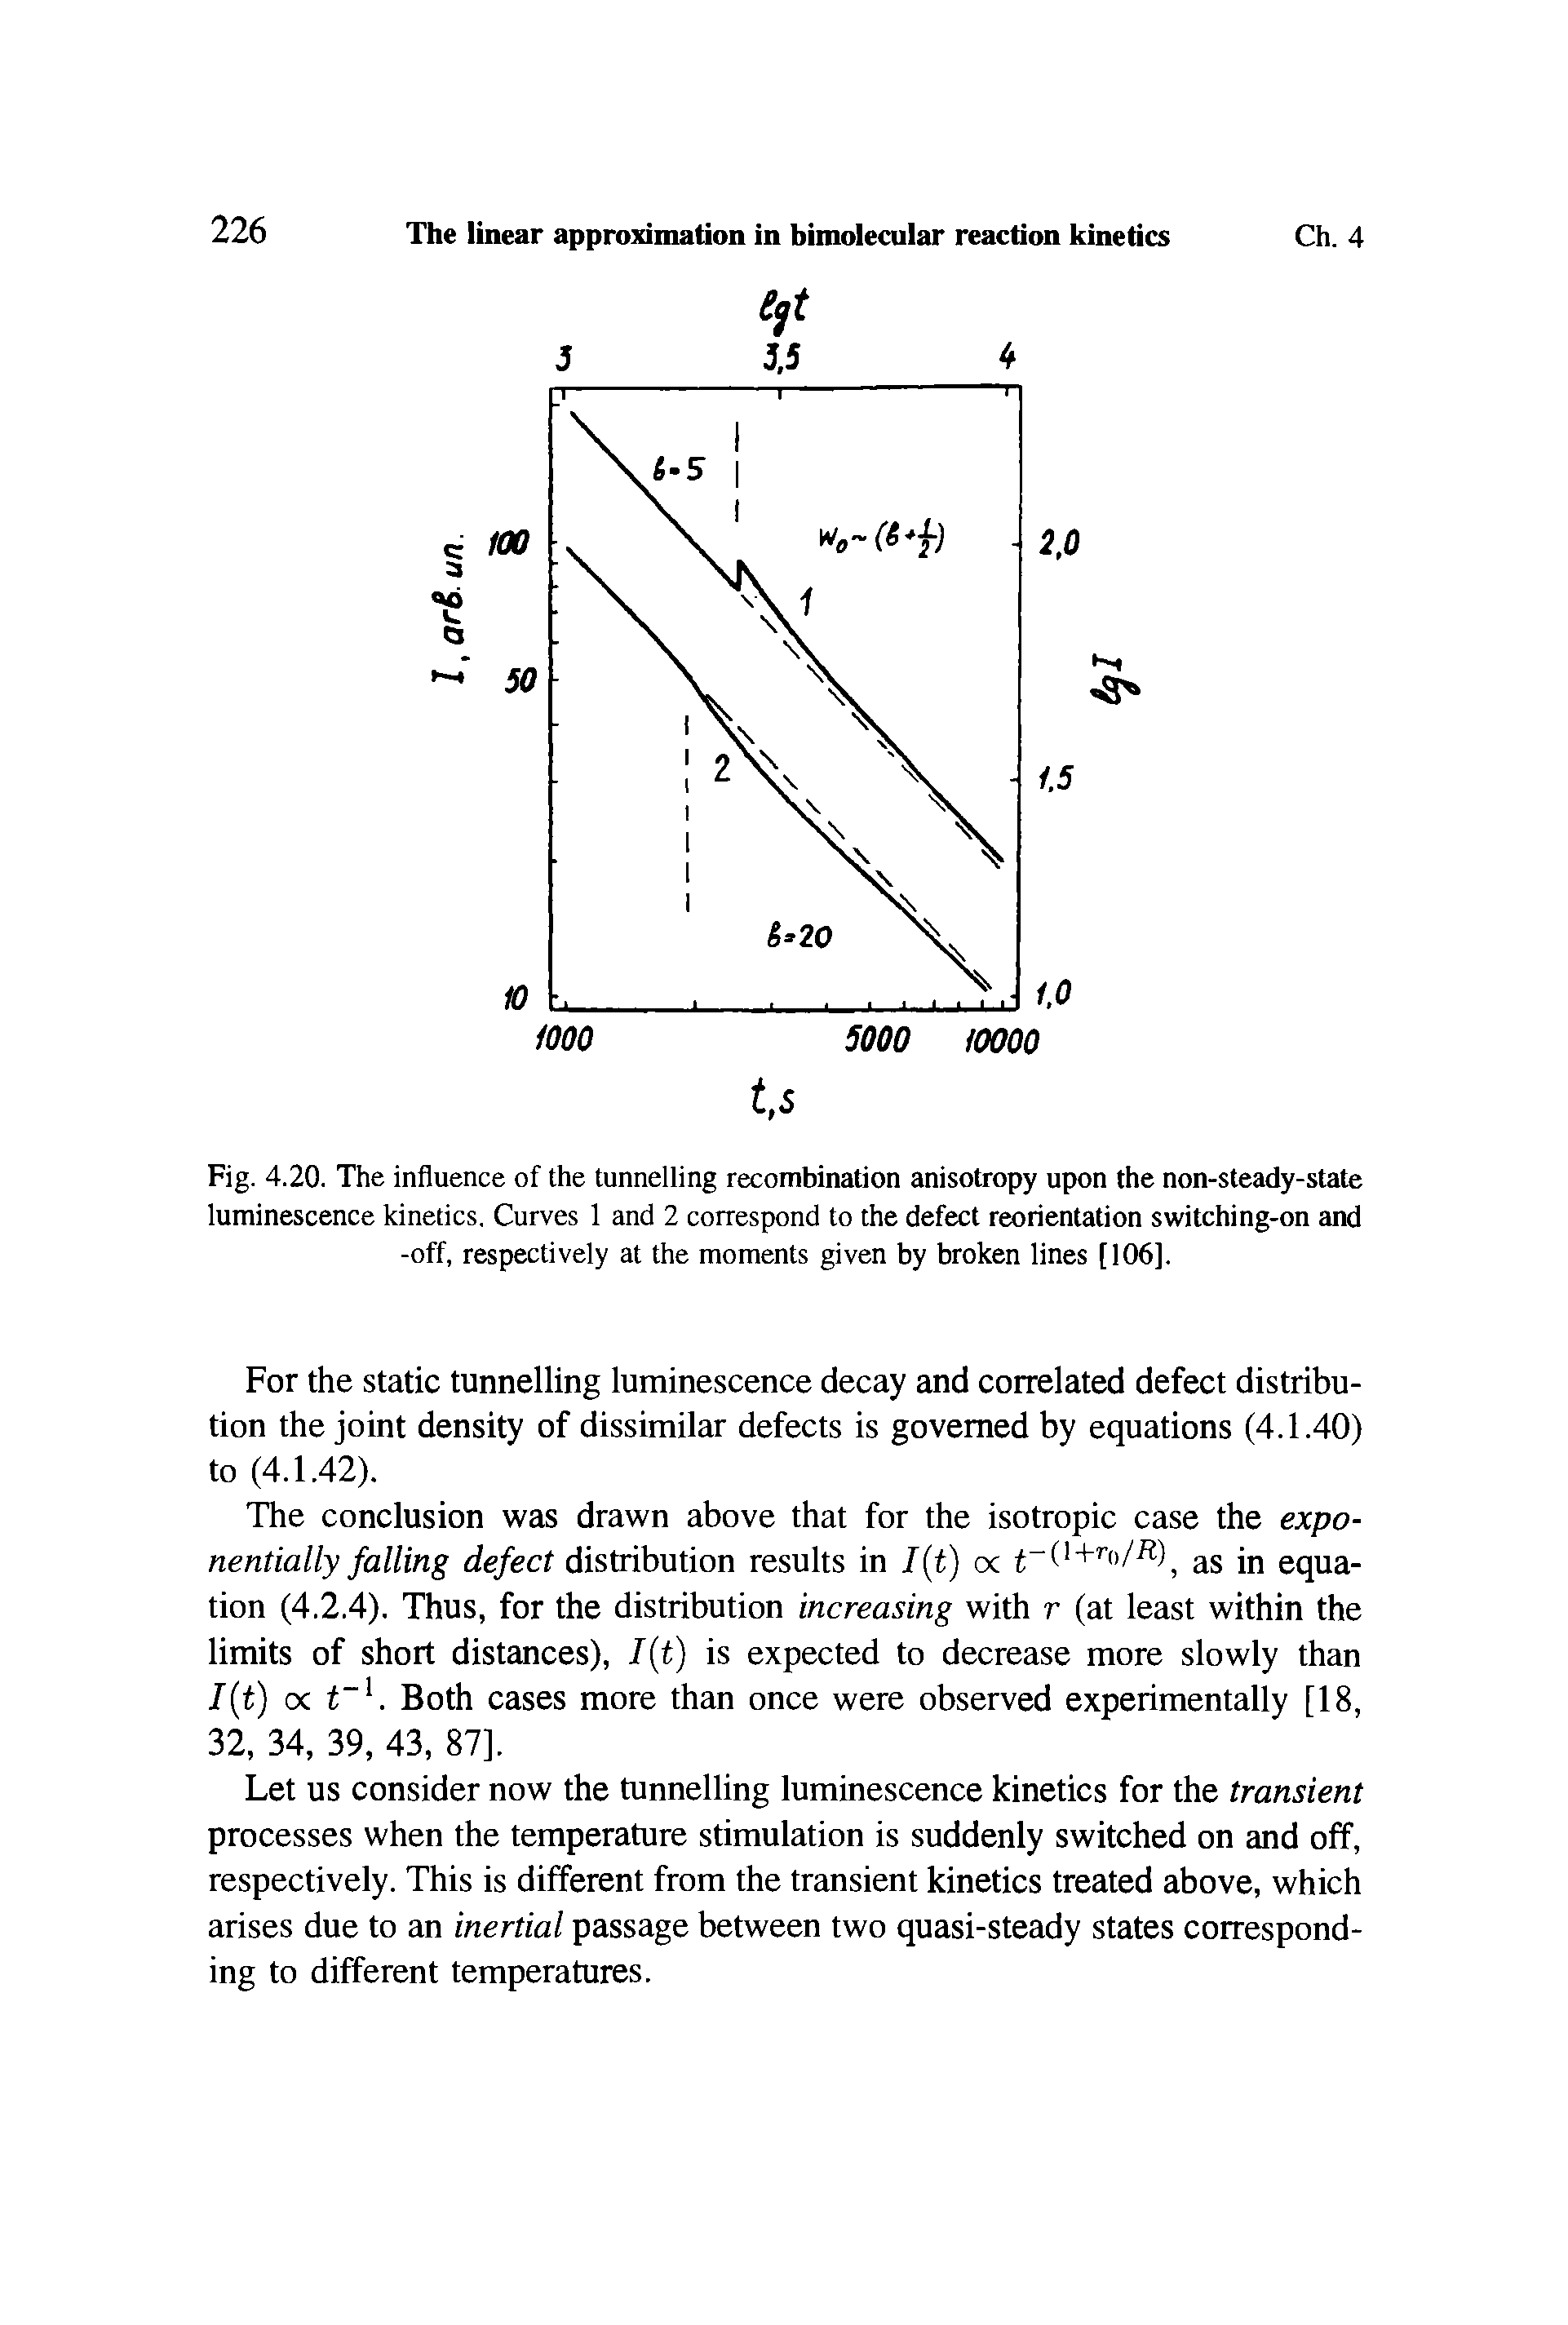 Fig. 4.20. The influence of the tunnelling recombination anisotropy upon the non-steady-state luminescence kinetics. Curves 1 and 2 correspond to the defect reorientation switching-on and -off, respectively at the moments given by broken lines [106],...